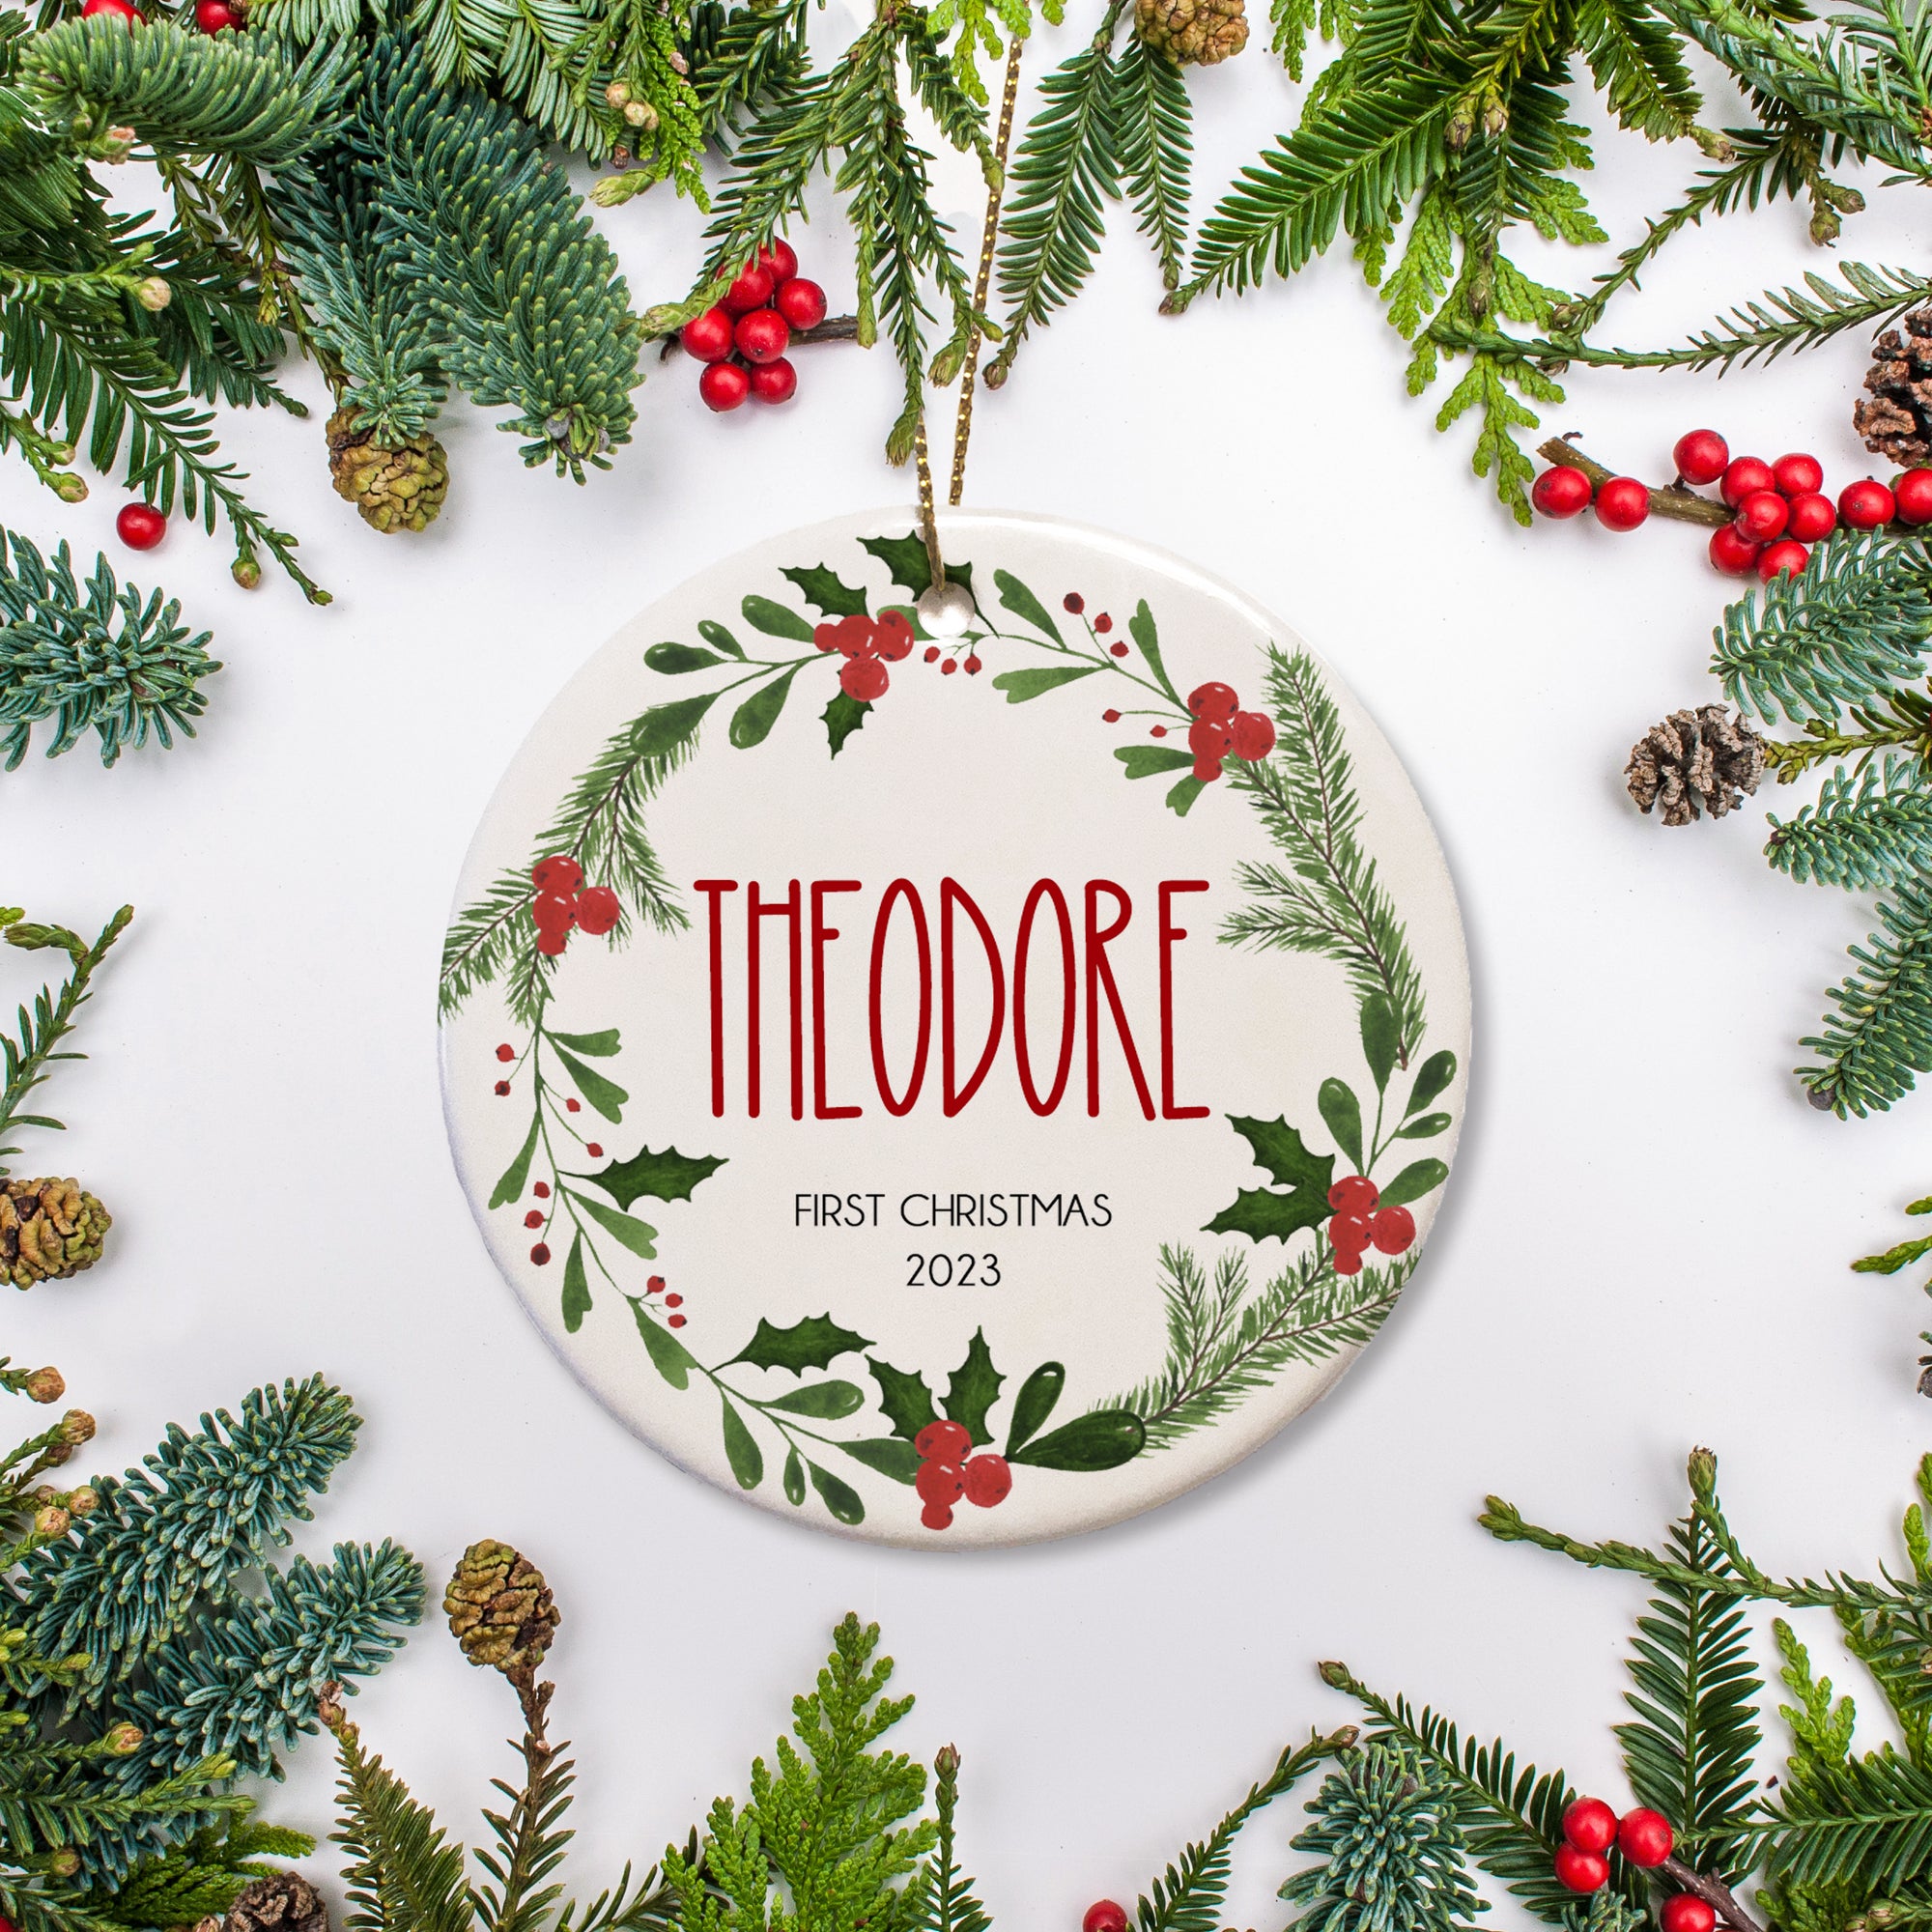 Baby's first Christmas personalized Ornament. Name and year of your choice in the center of a holly and pine wreath. | PIPSY.COM